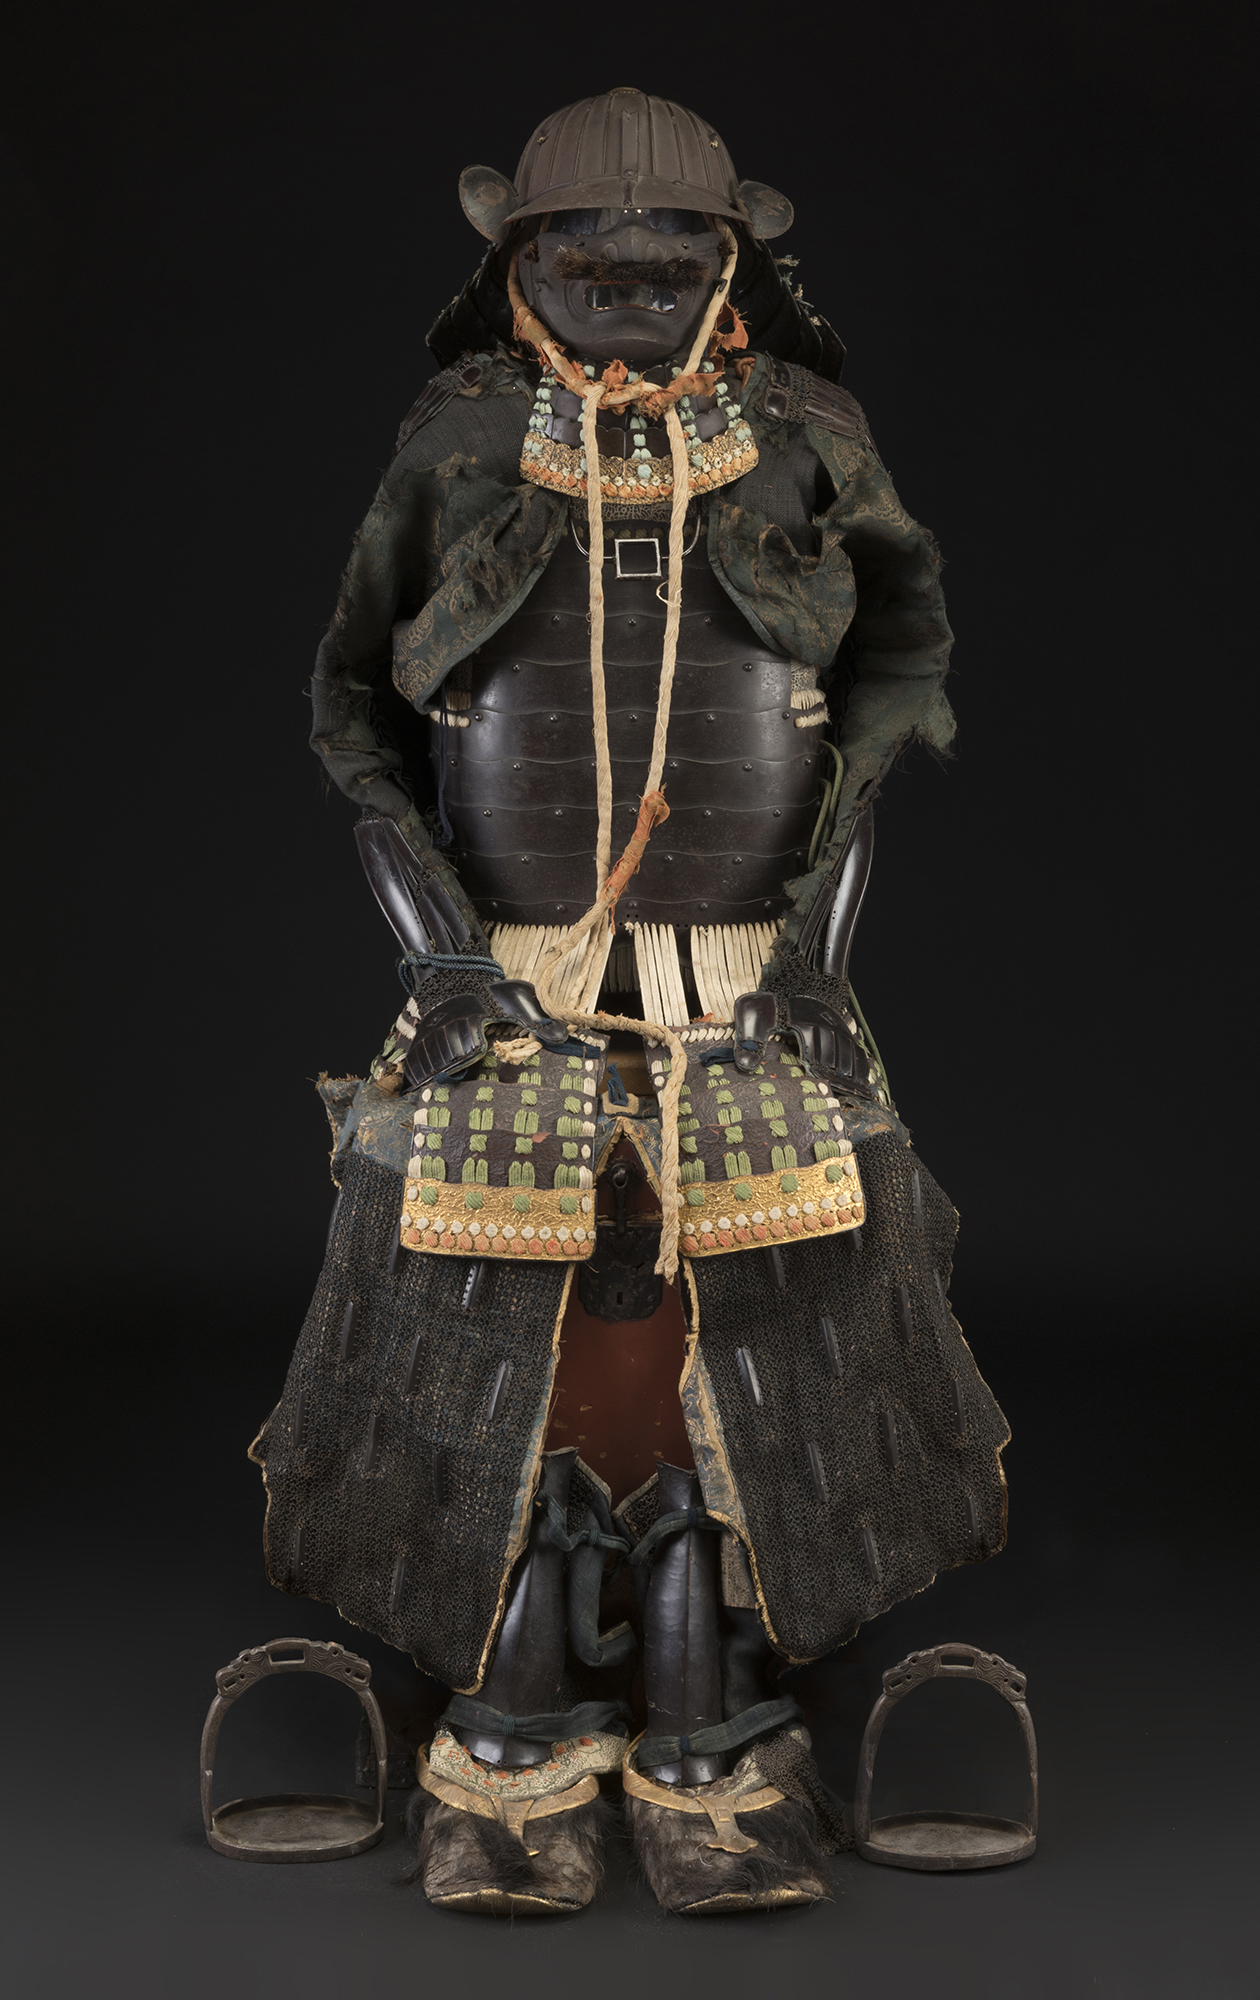 Suit of samurai armour, Edo period, Japan, 18th century.Steel, leather, cloth and lacquered chain